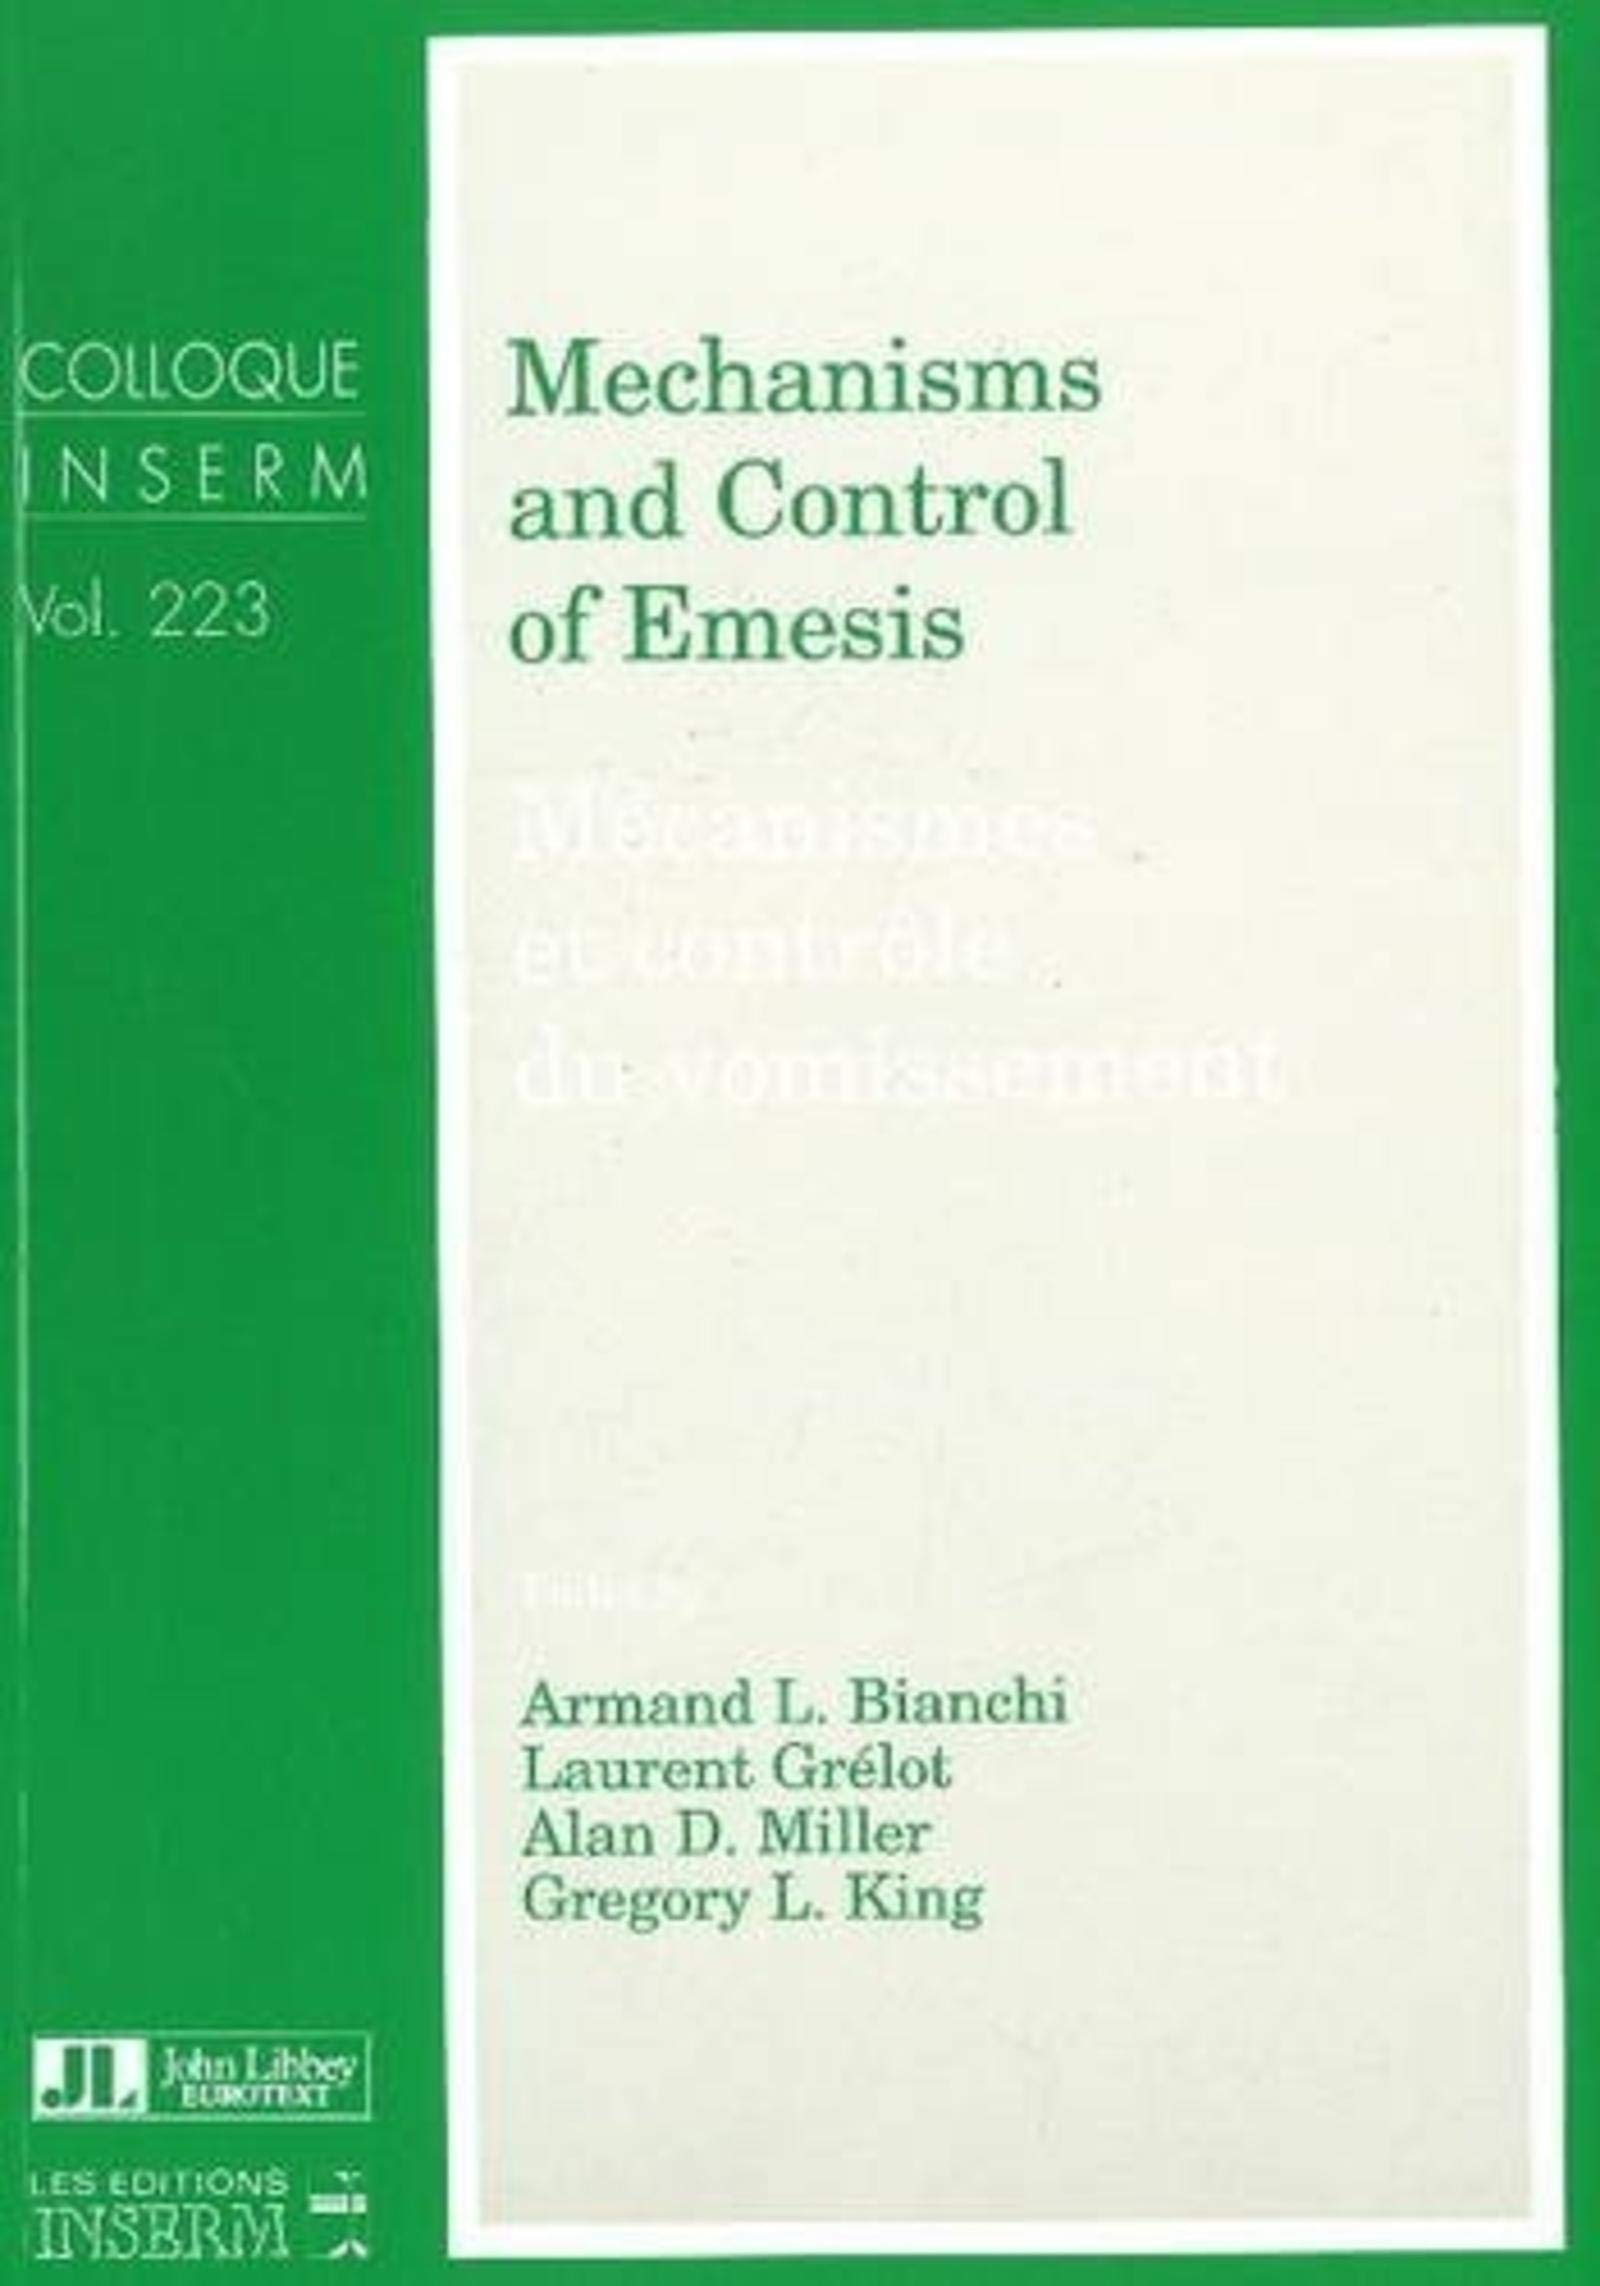 Mechanisms and Control of Emesis (Colloque Inserm) (English and French Edition)